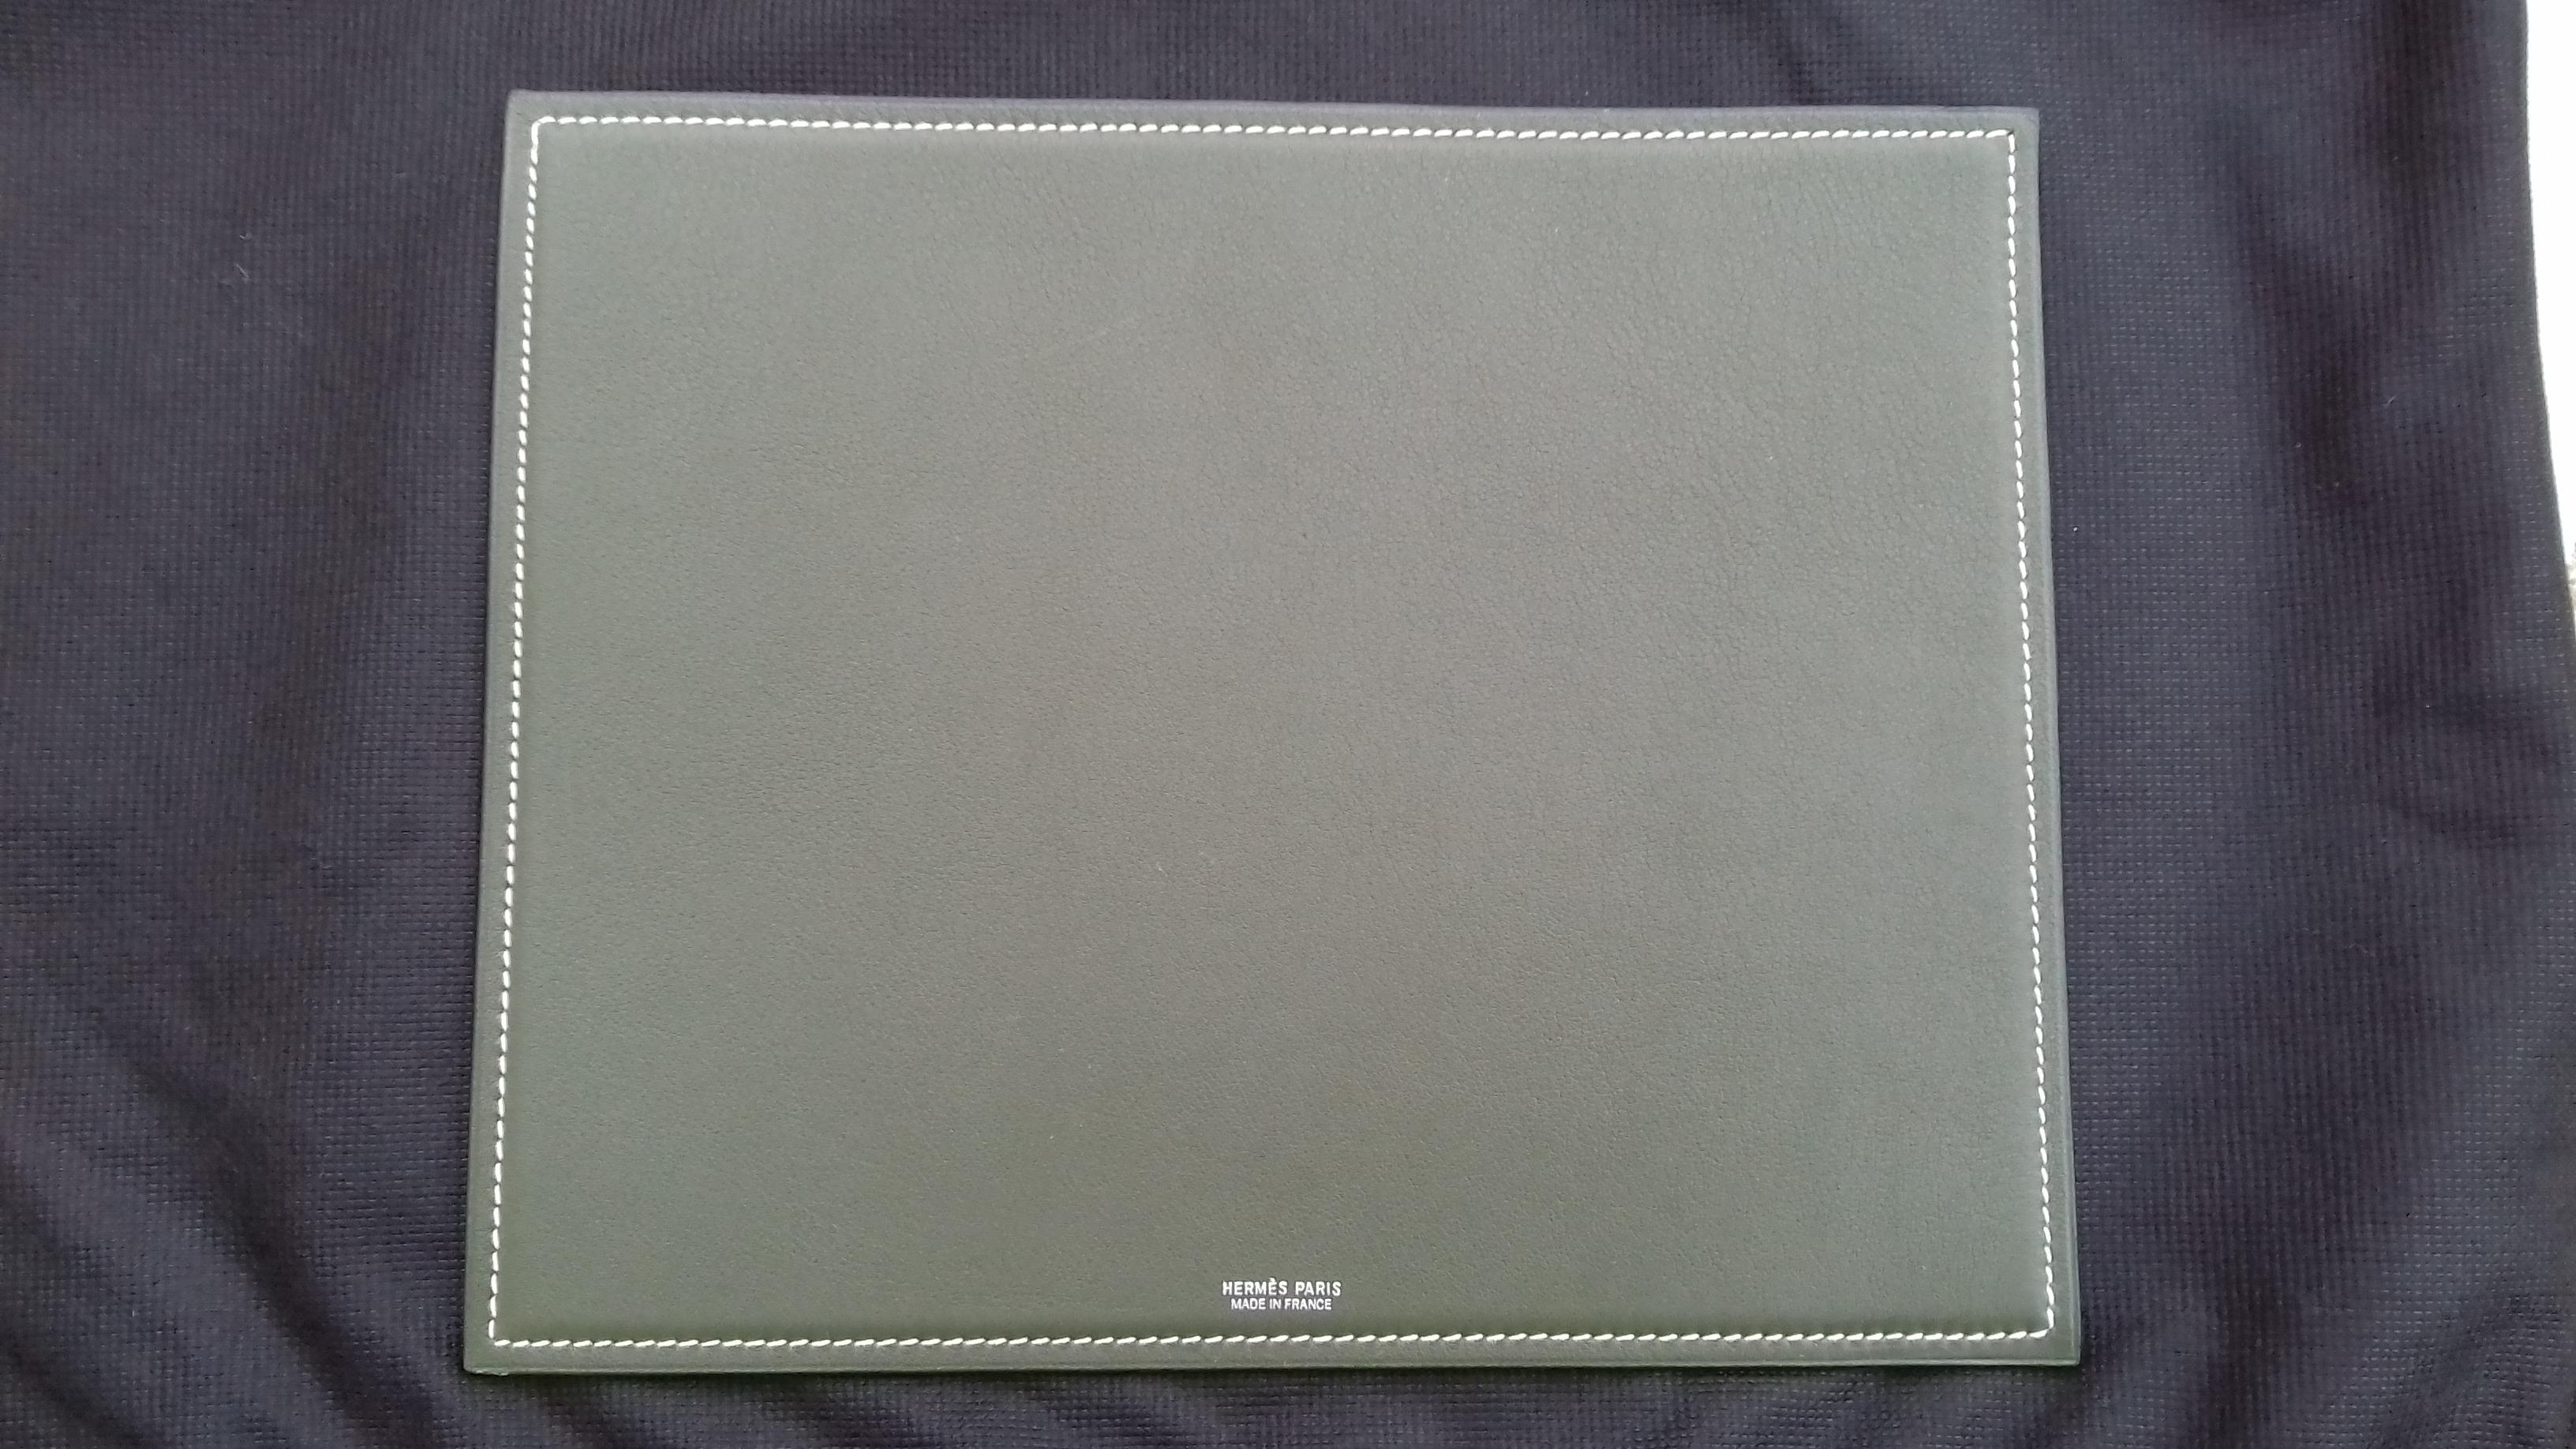 Rare Authentic Hermès Mousepad

Can be used as small desk blotter (pay attention to dimensions)

Made in France

Stamp E in square (2001)

Made of Leather

Colorways: One side Green-Grey, other side Apple Green

White seams

